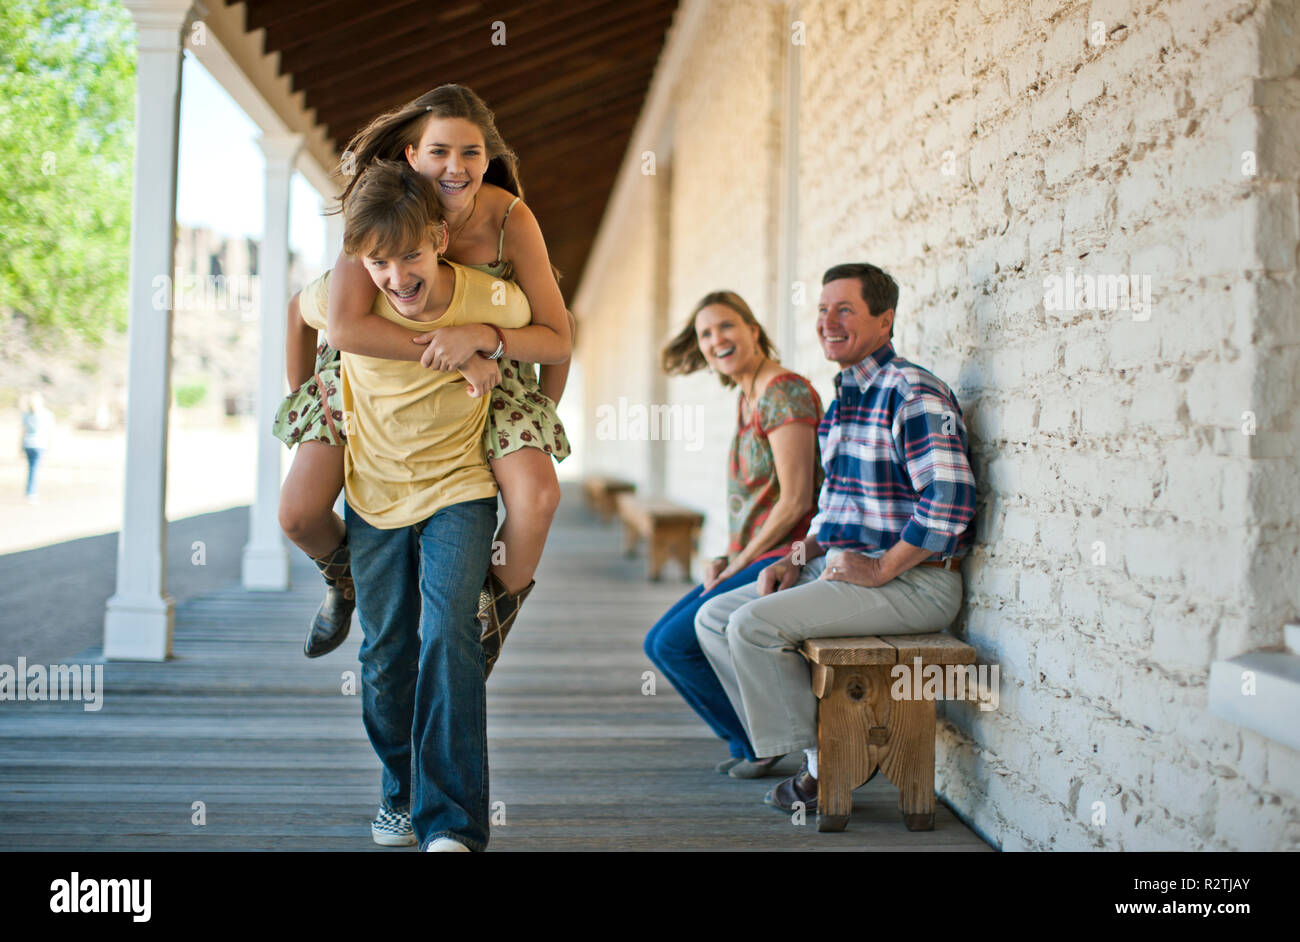 Smiling teenage boy  carrying his sister on his back as their parents look on. Stock Photo